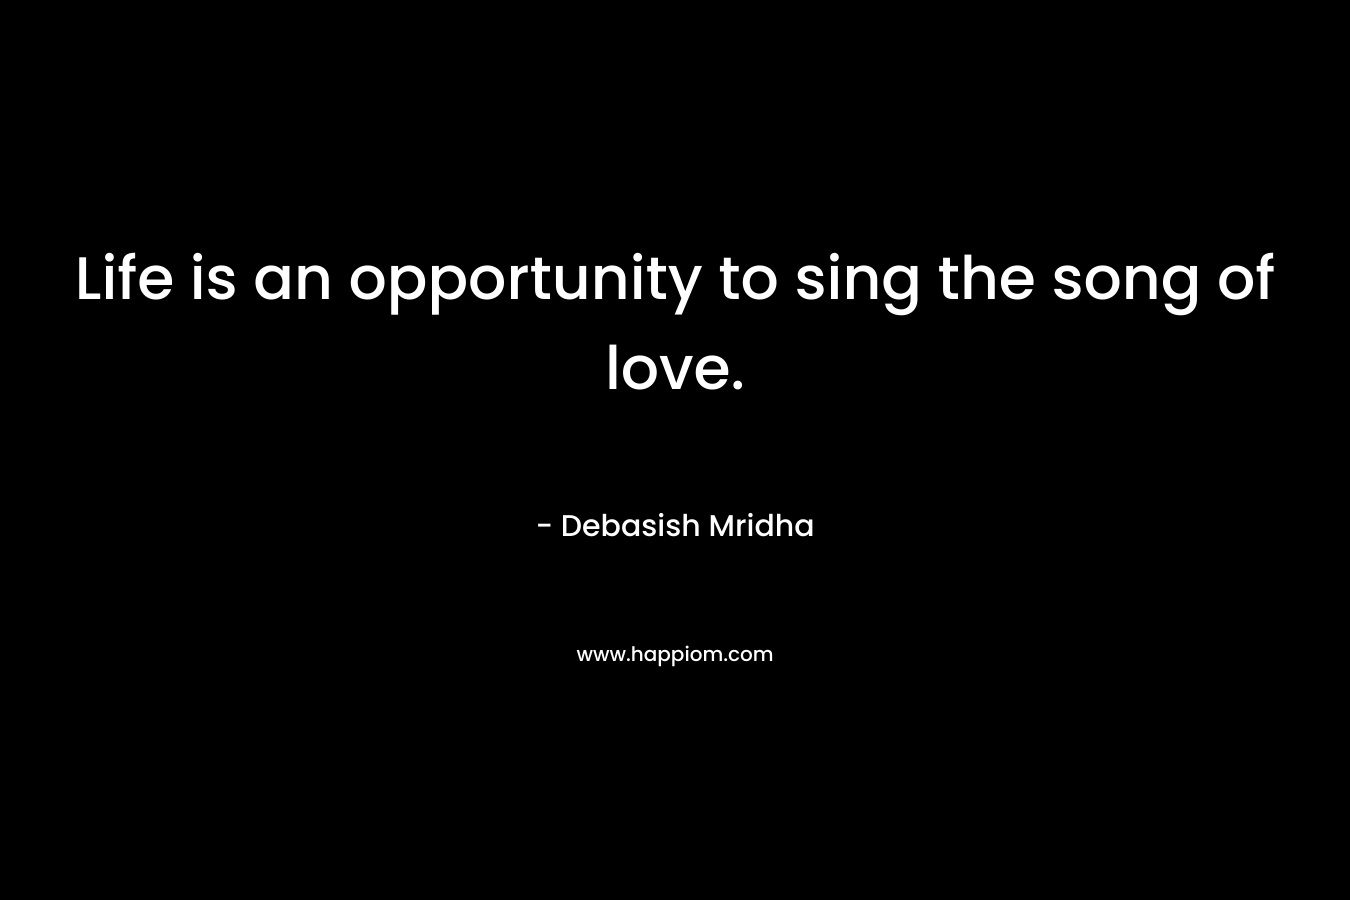 Life is an opportunity to sing the song of love.